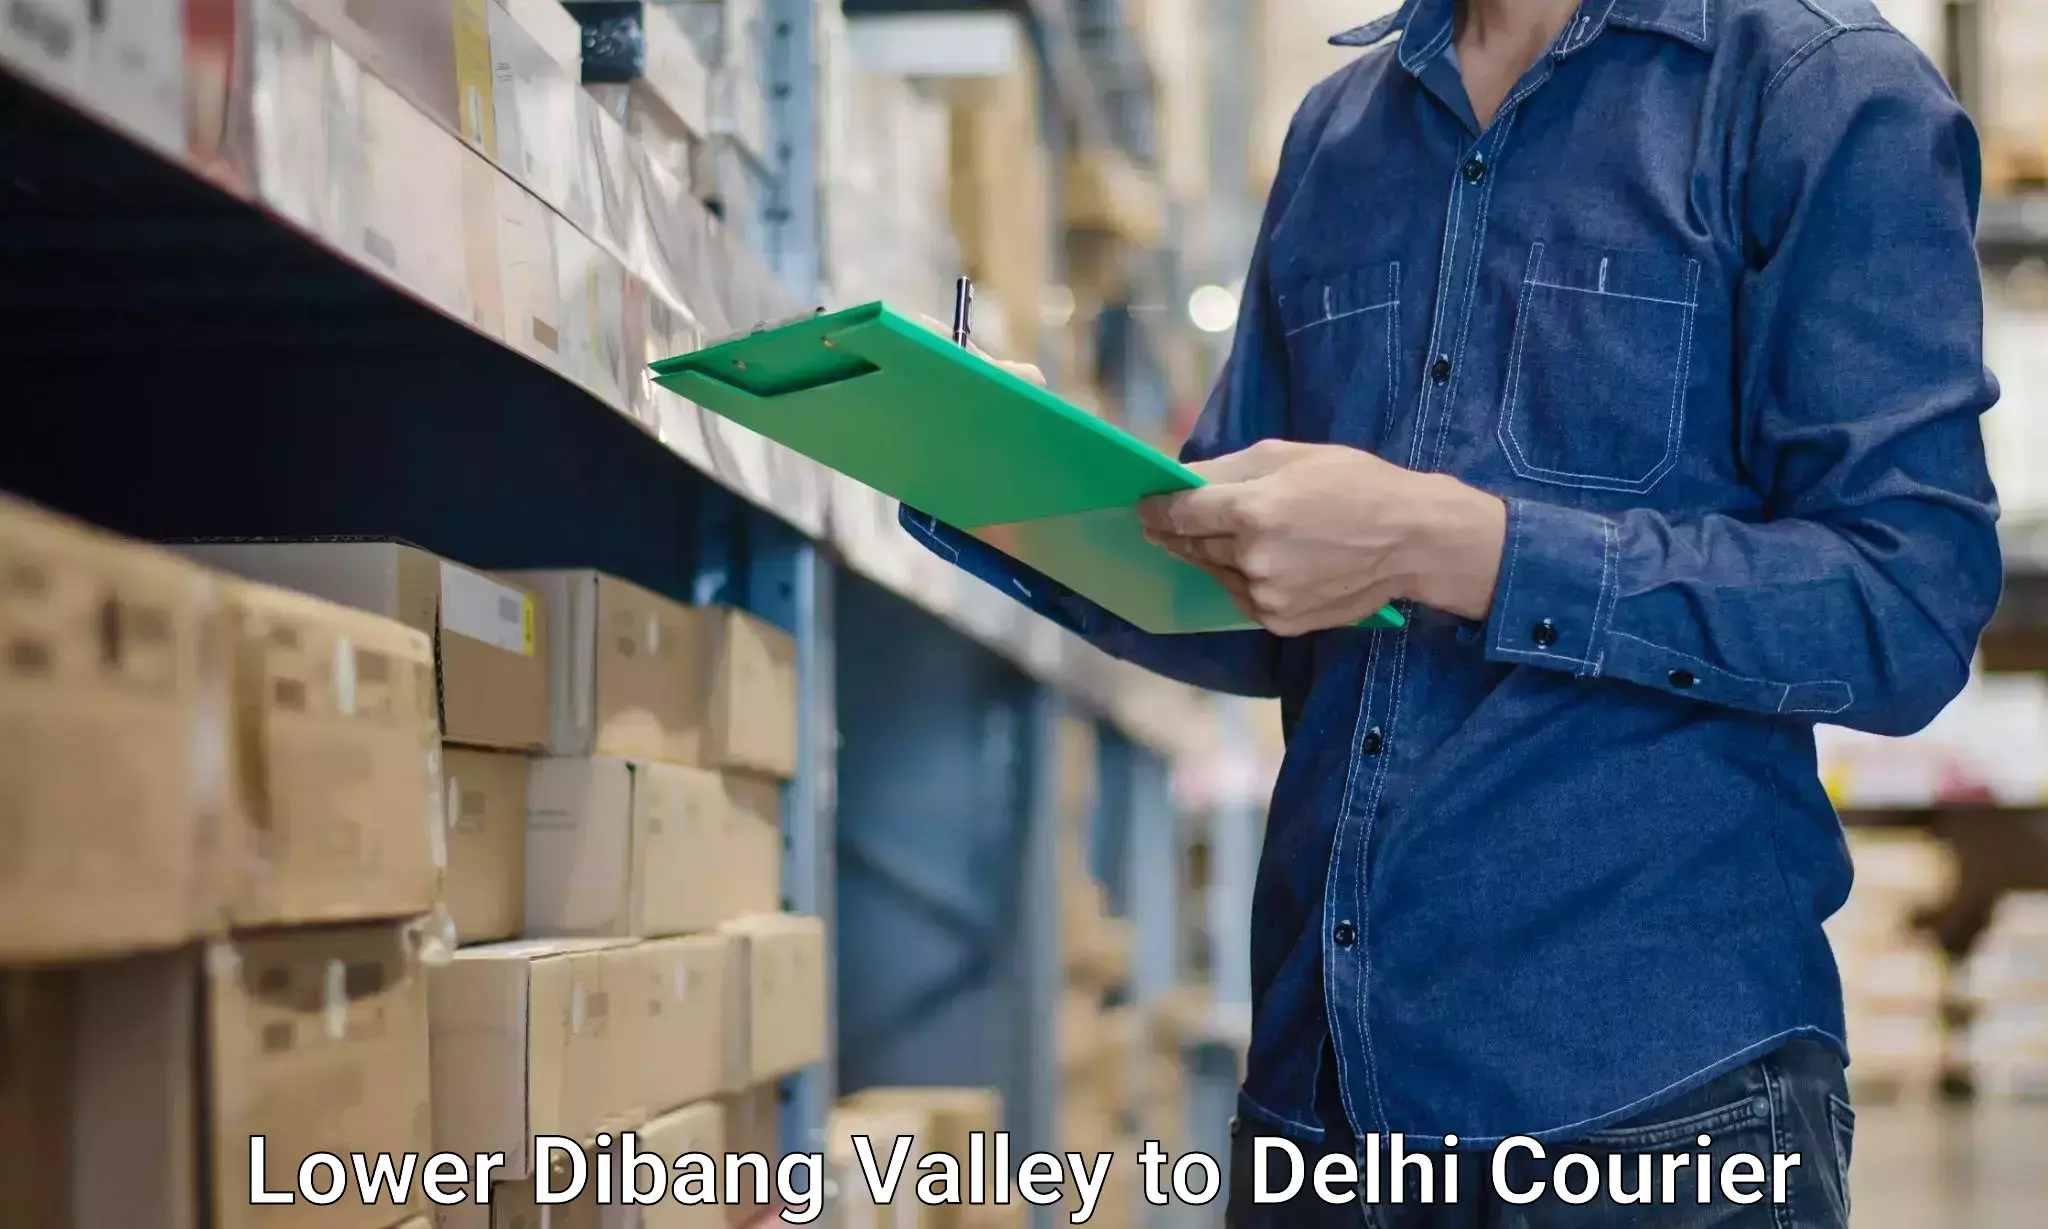 Home relocation experts Lower Dibang Valley to Ashok Vihar